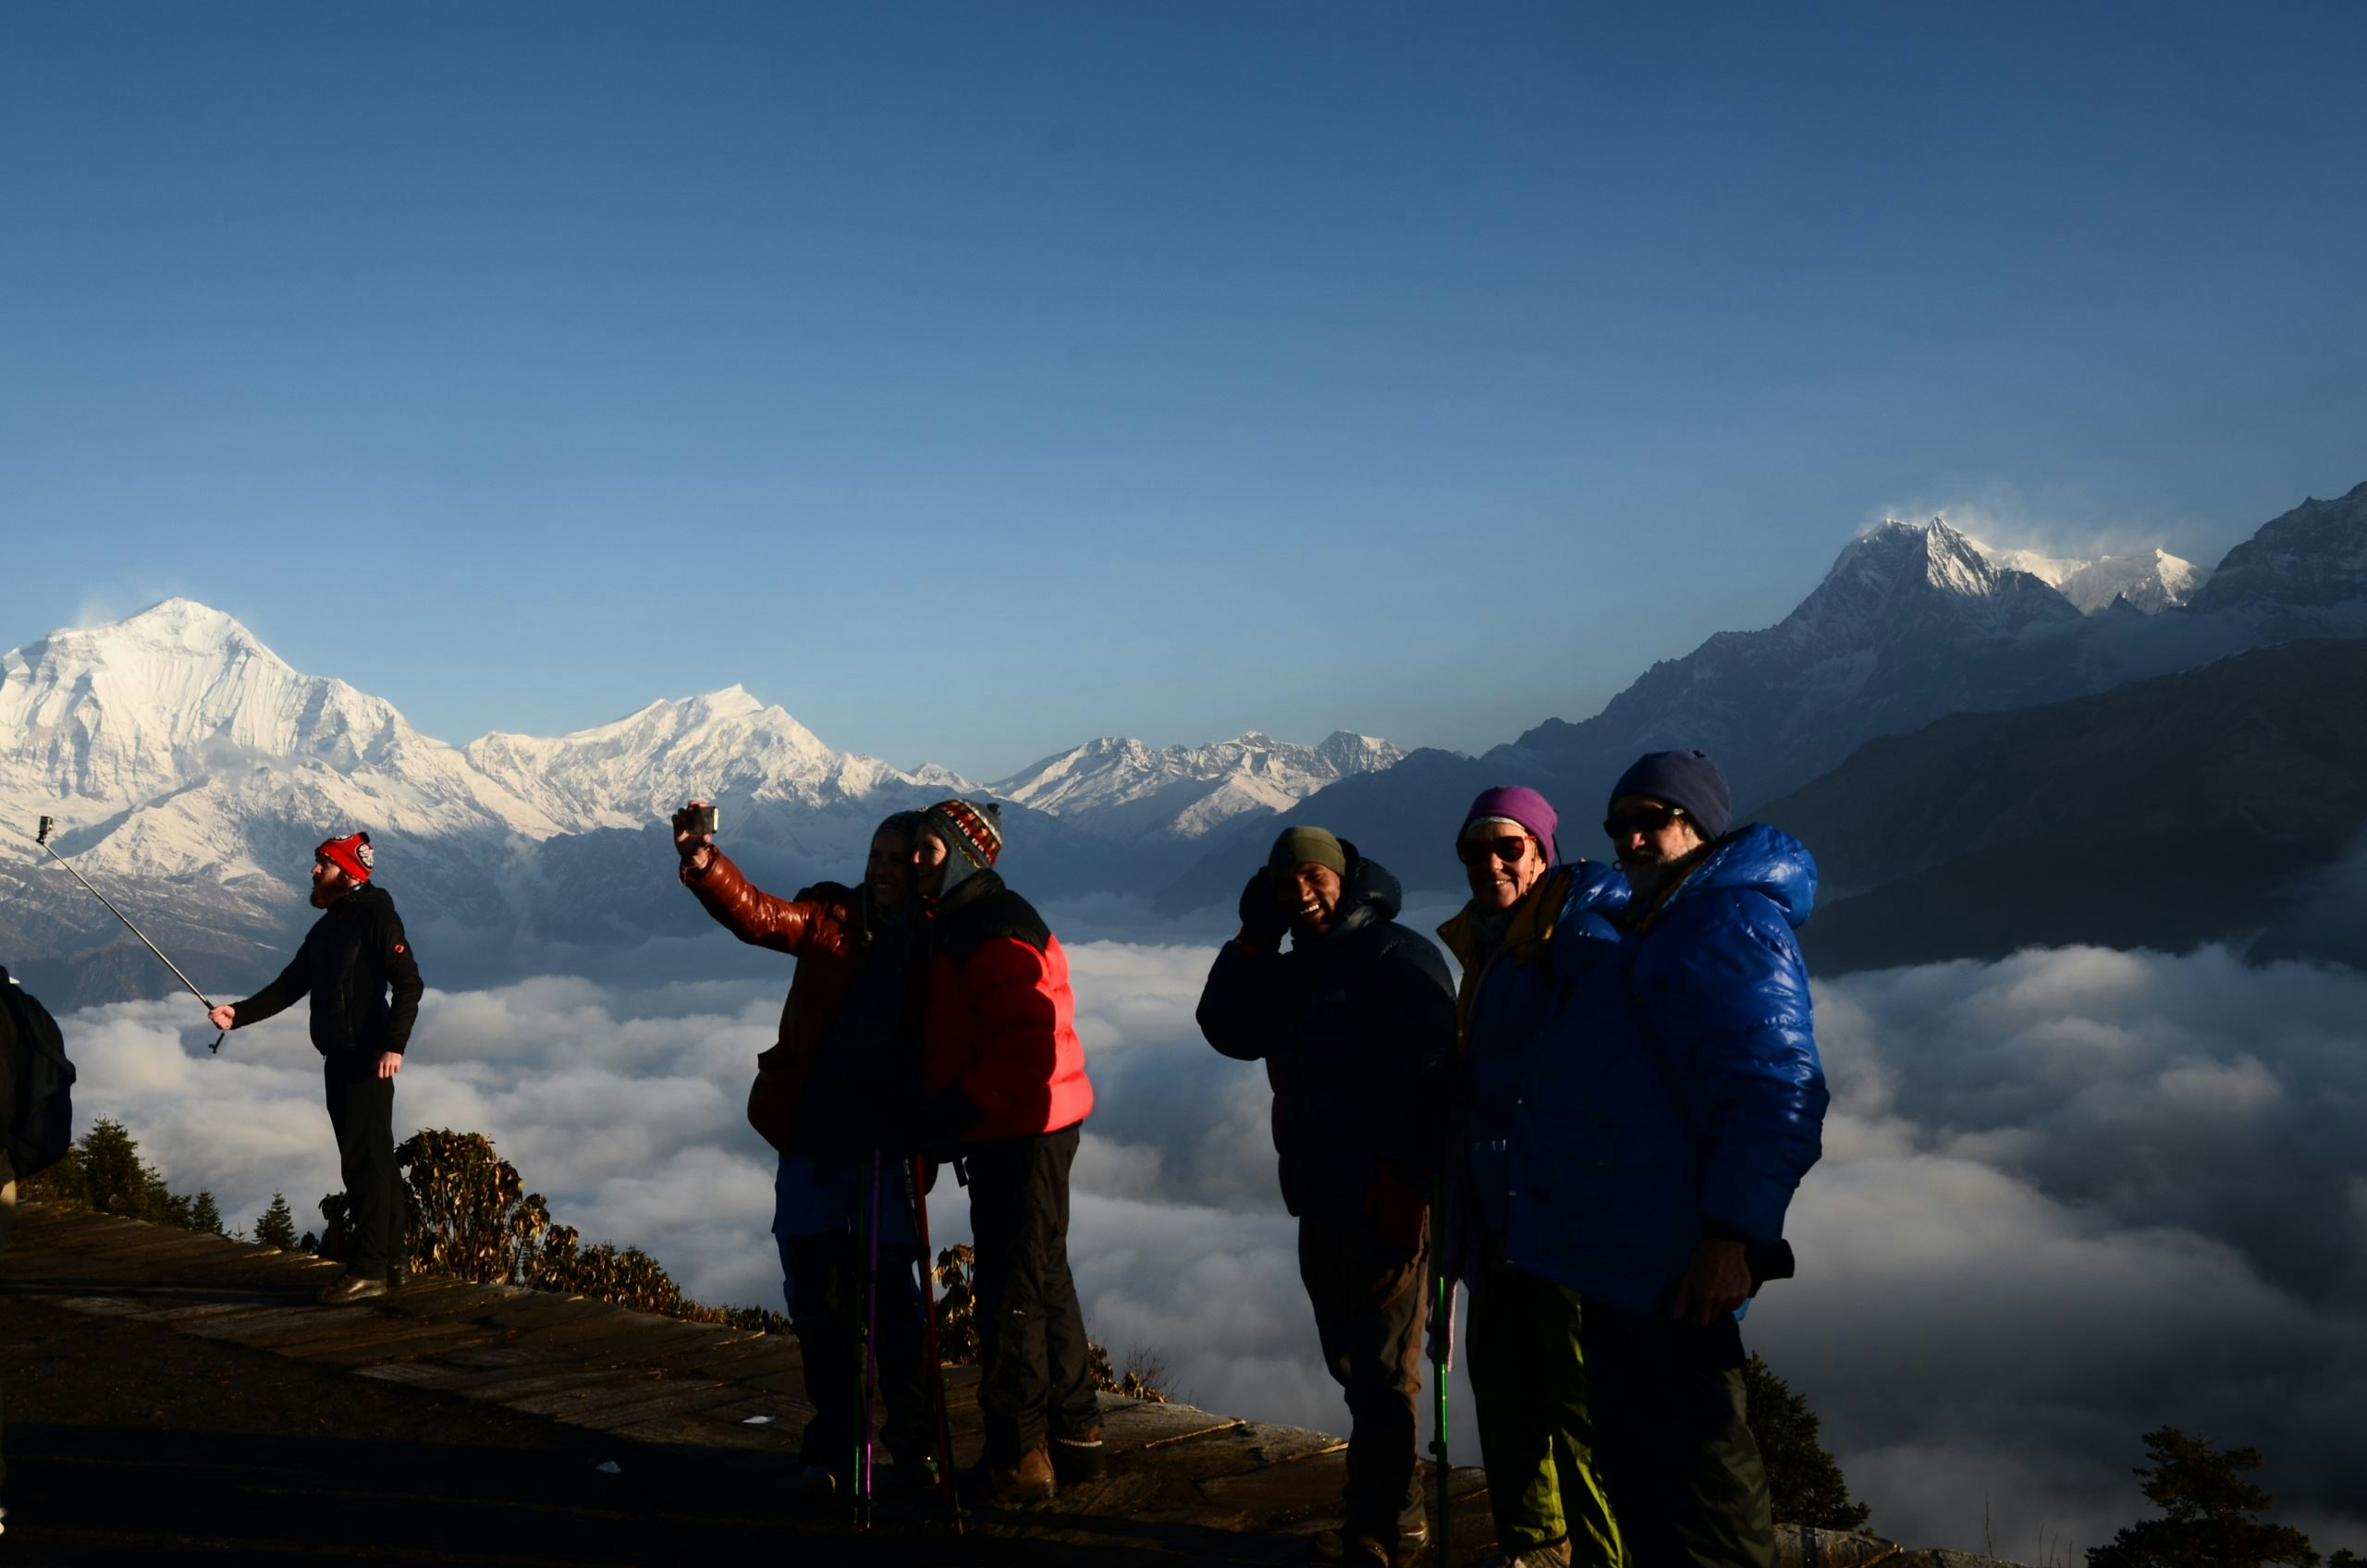 Traveling In Nepal: Students Learn While Trekking in the Himalayas